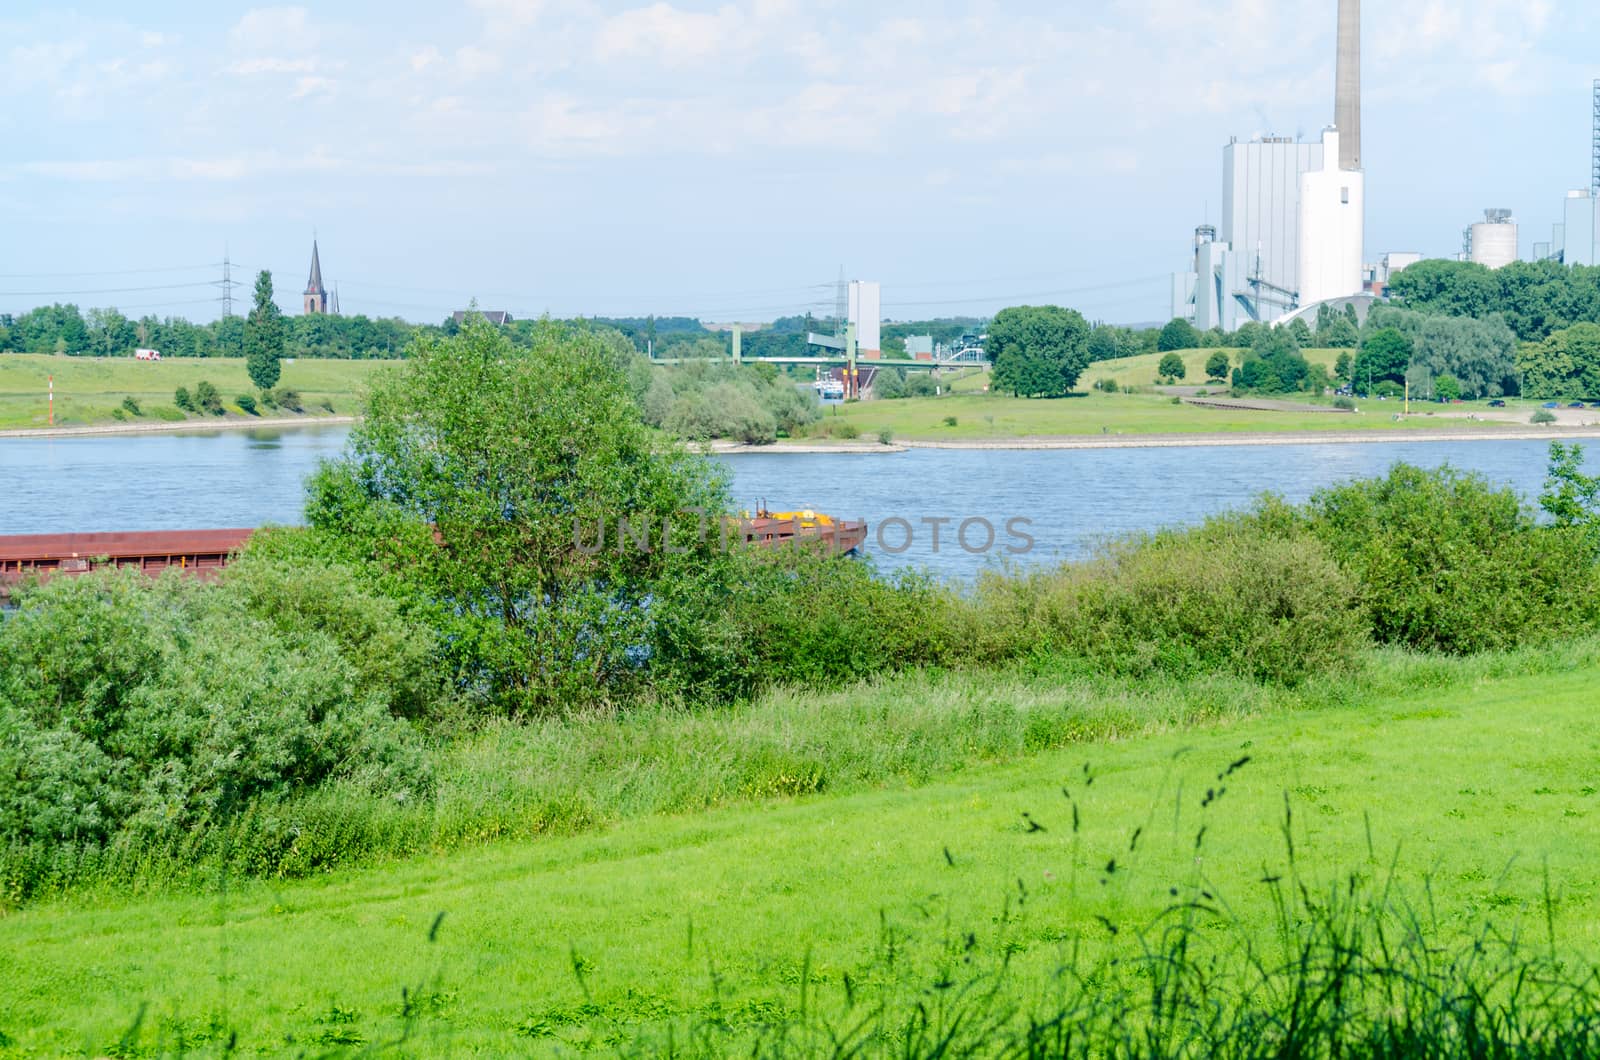 Beautiful Rhine landscape with views of a power plant in a green environment.